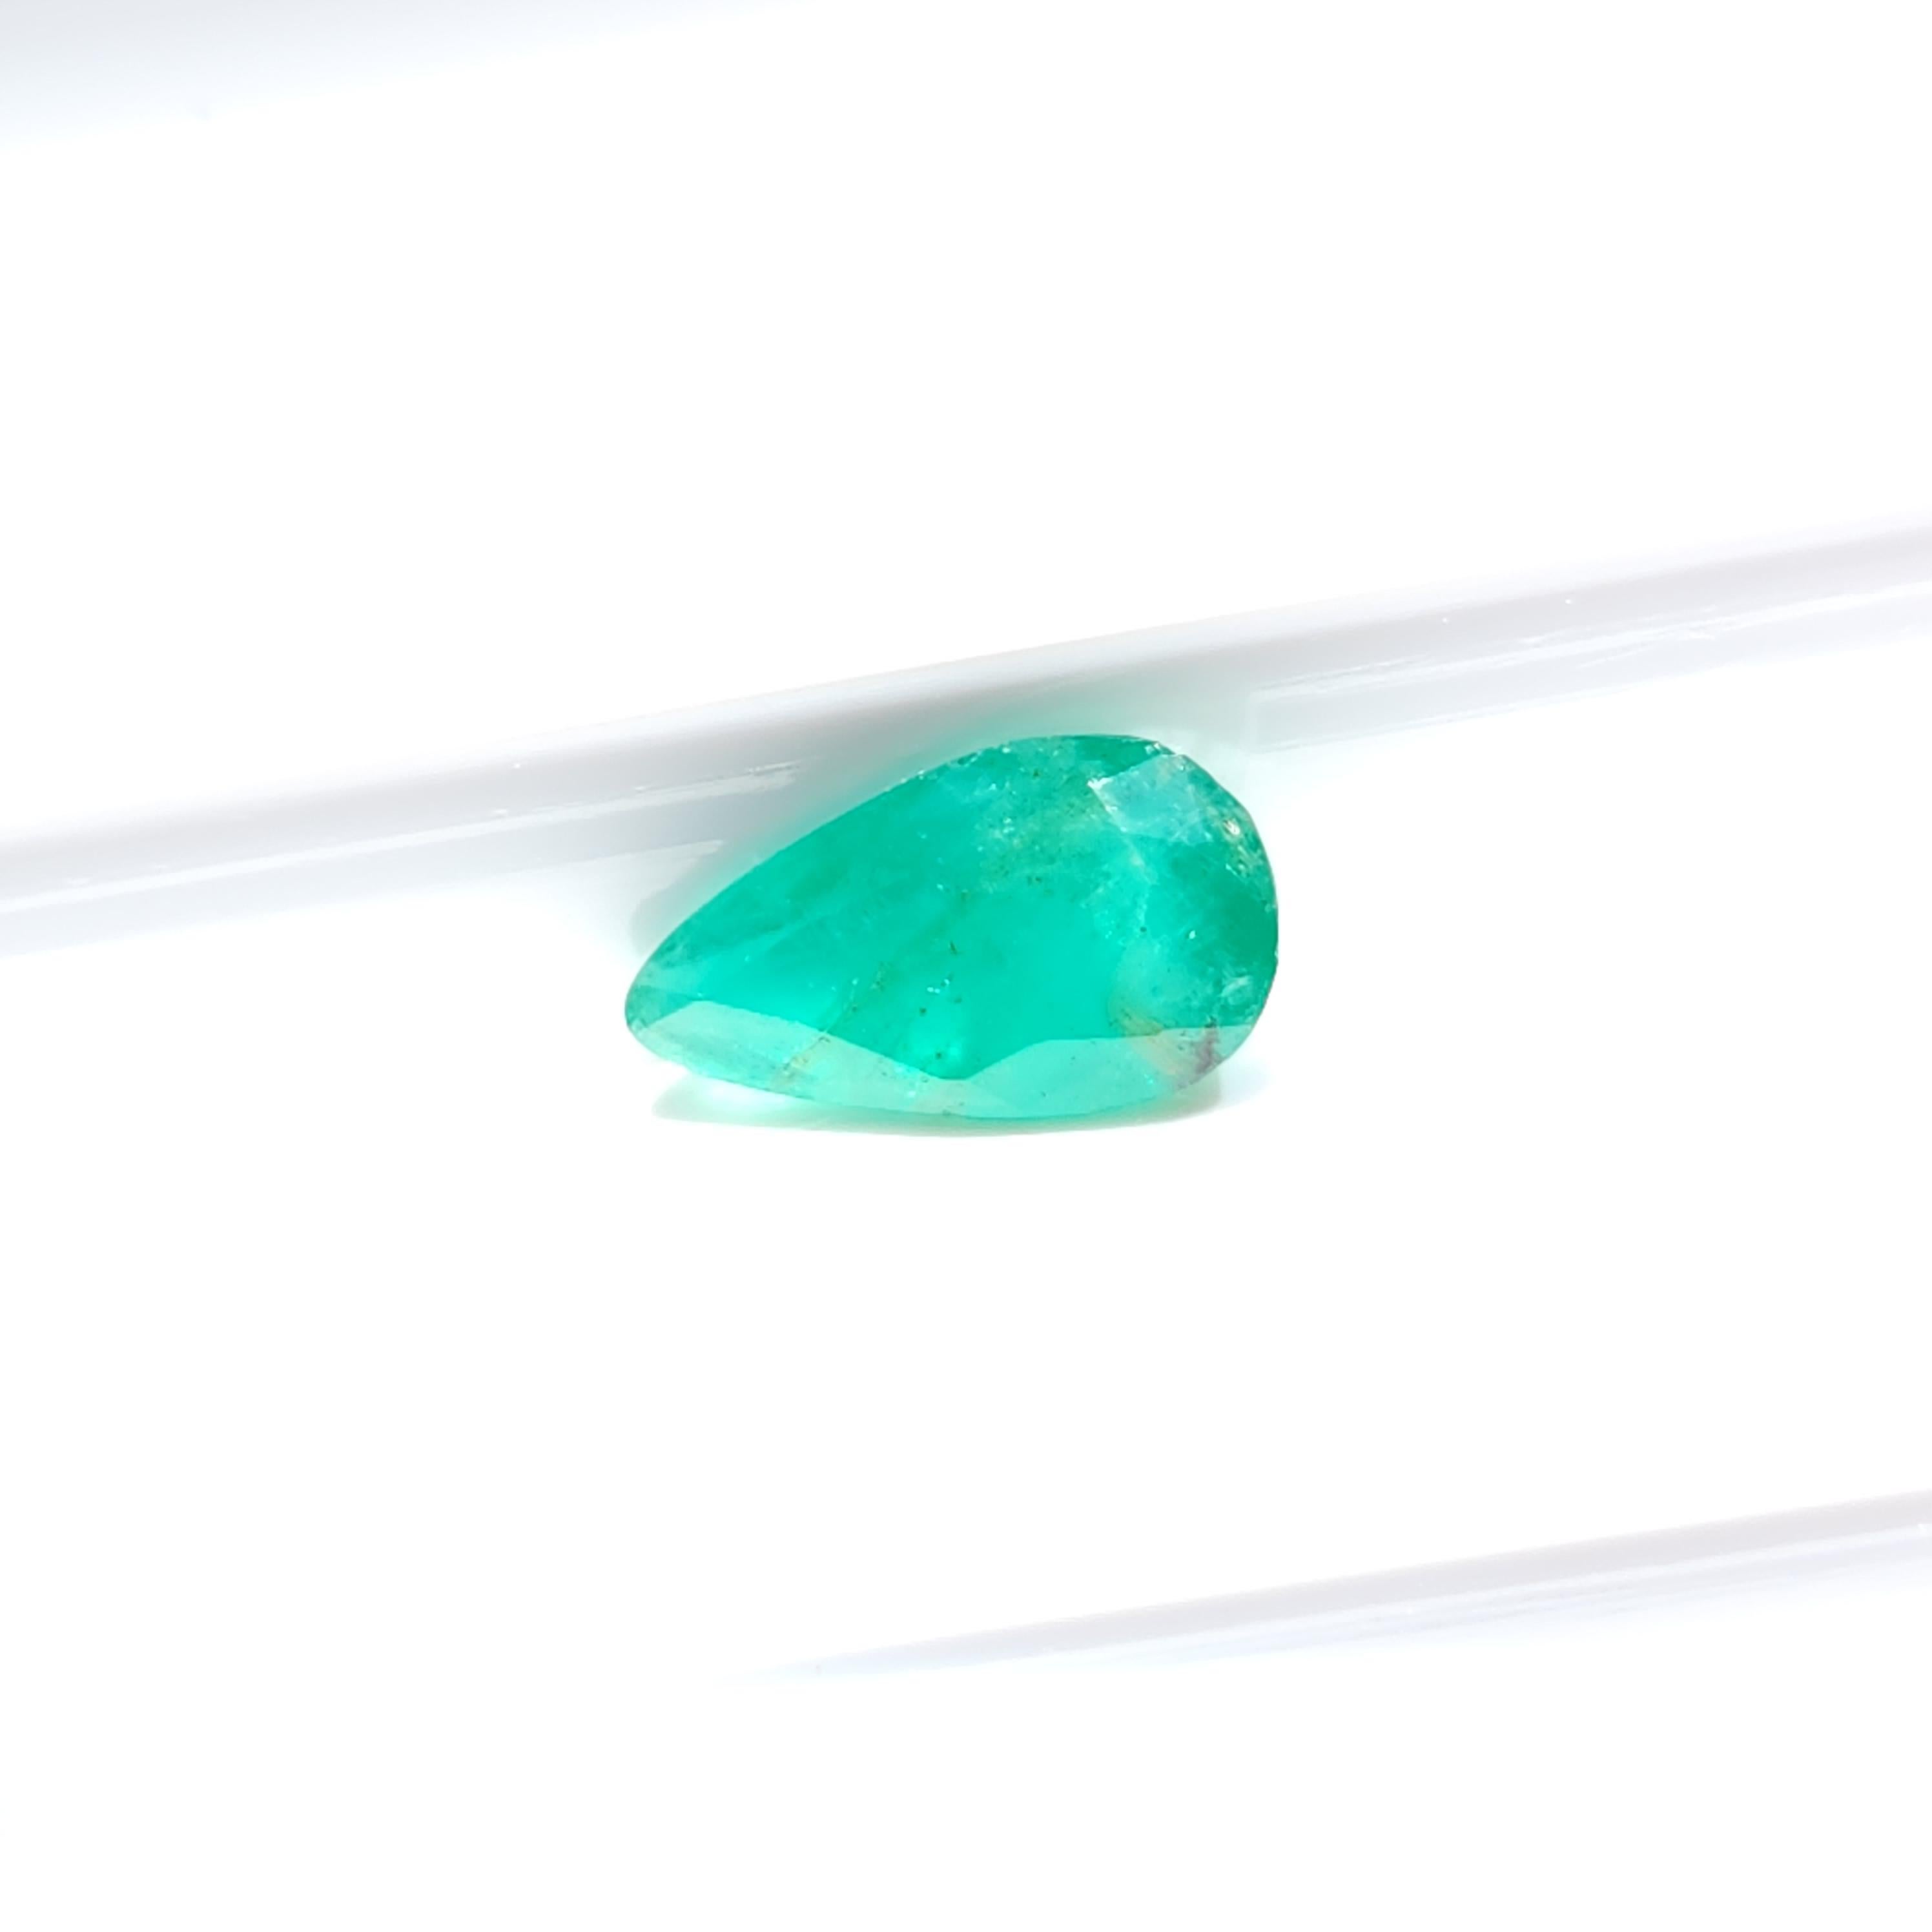 Elegant 0.55ct Loose Pear Shape Colombian Emerald Gemstone

Product Description:

Unveiling our captivating 0.55ct loose Pear Shape Colombian Emerald gemstone, a genuine reflection of Colombia's verdant heart and nature's impeccable craftsmanship.